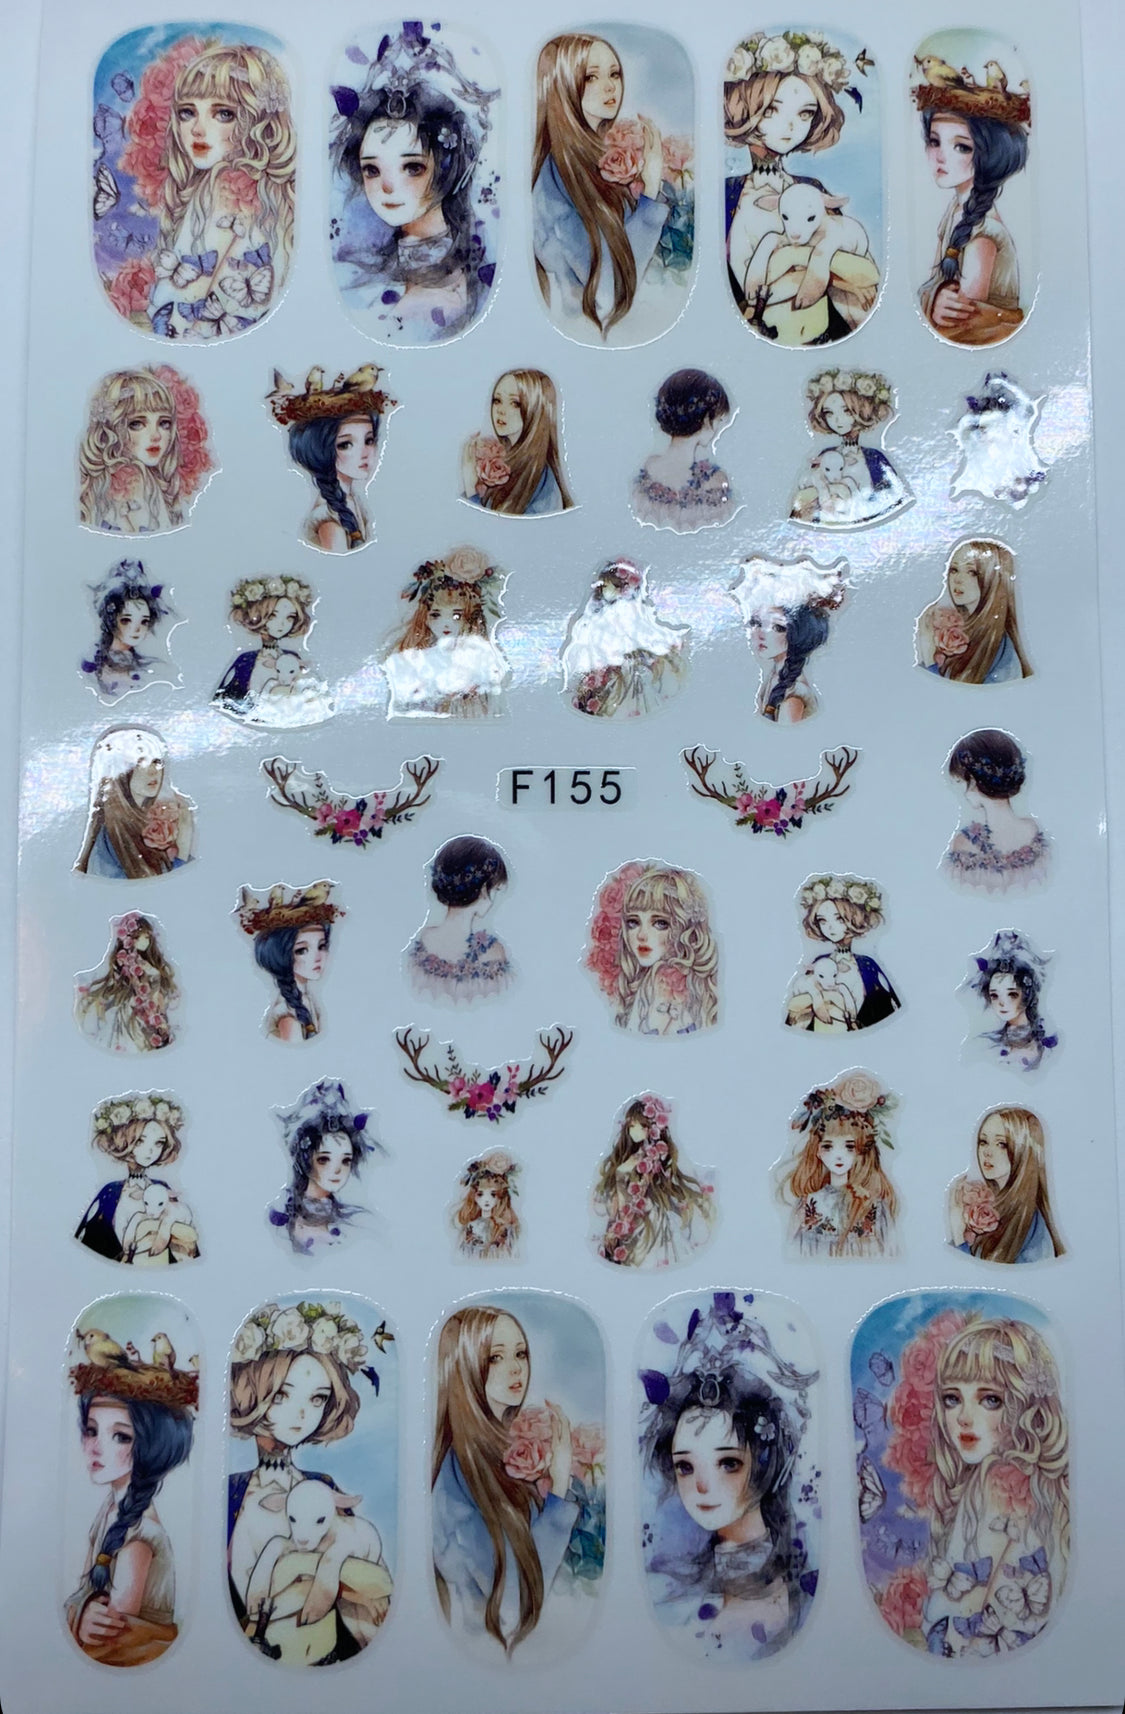 Charm Sticker Collection 17